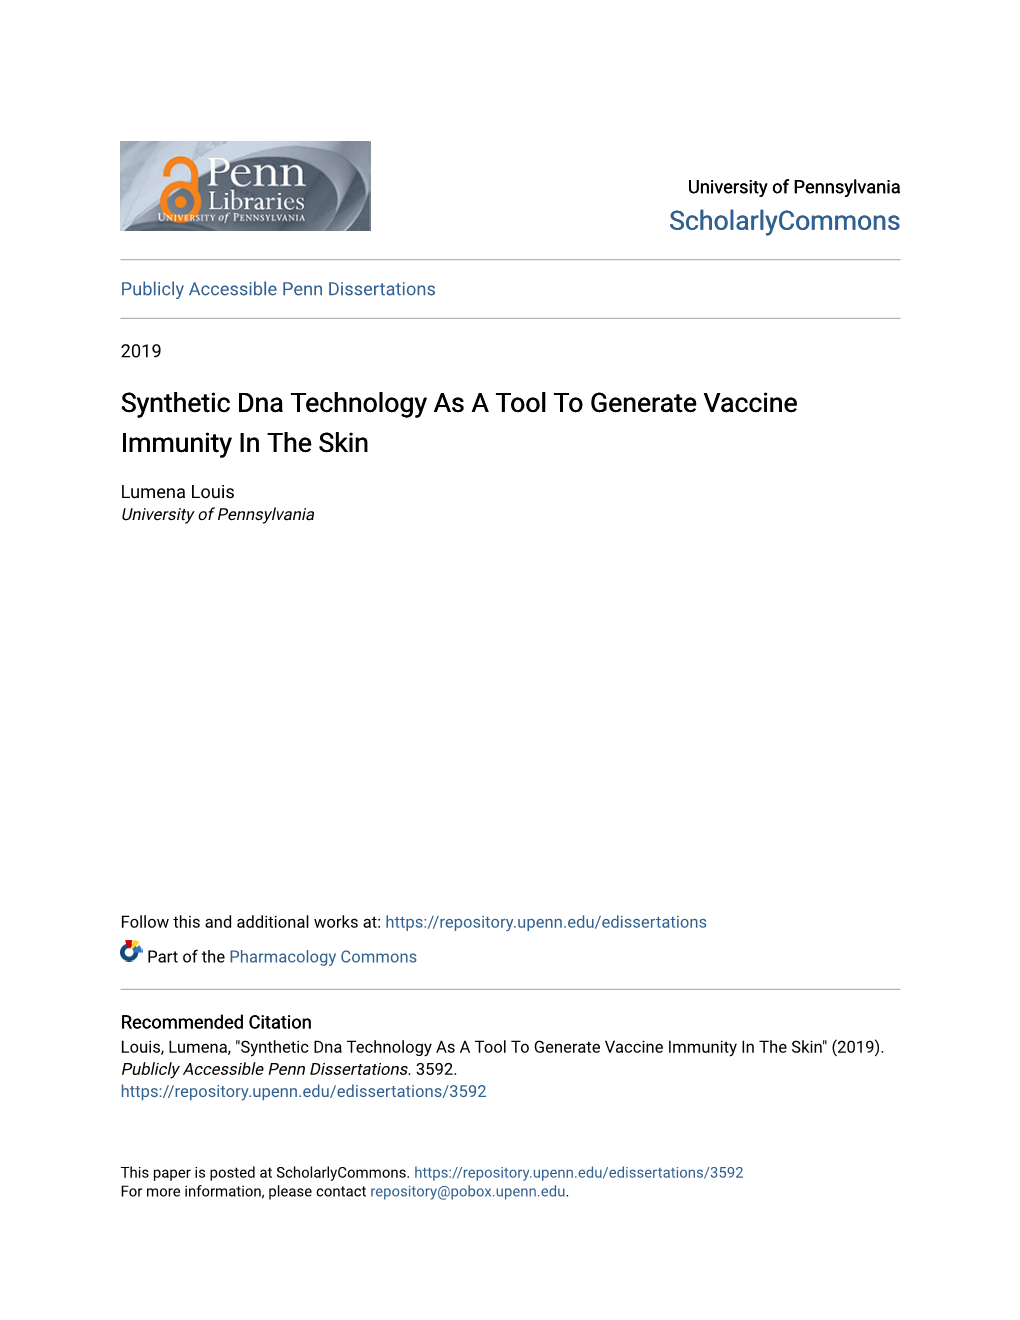 Synthetic Dna Technology As a Tool to Generate Vaccine Immunity in the Skin